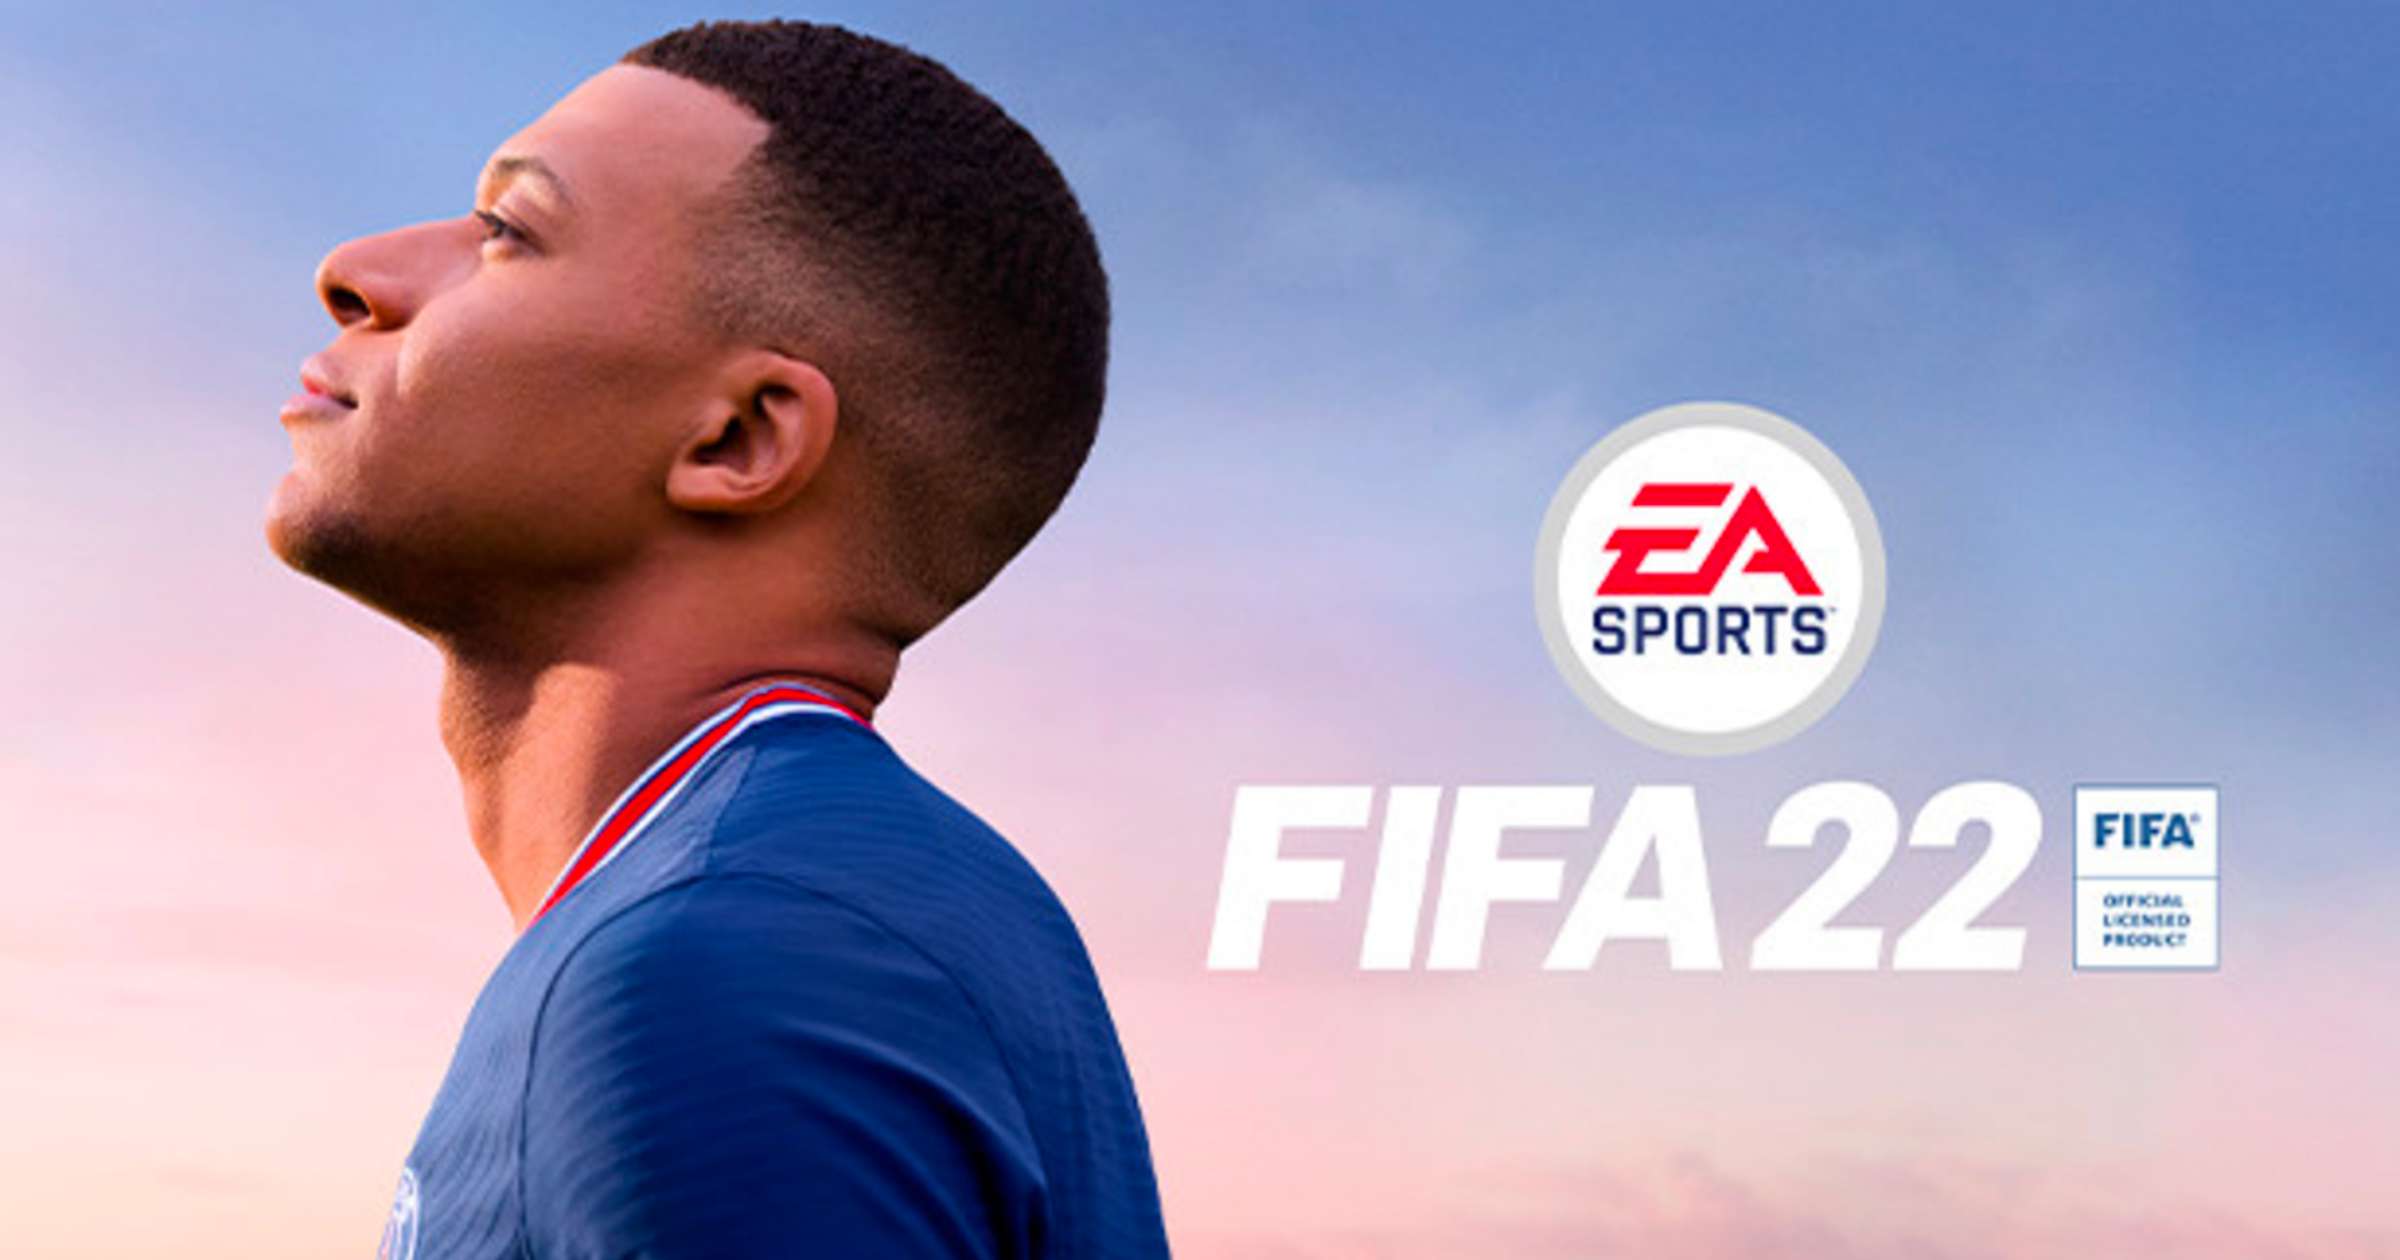 FIFA 22 Official Game